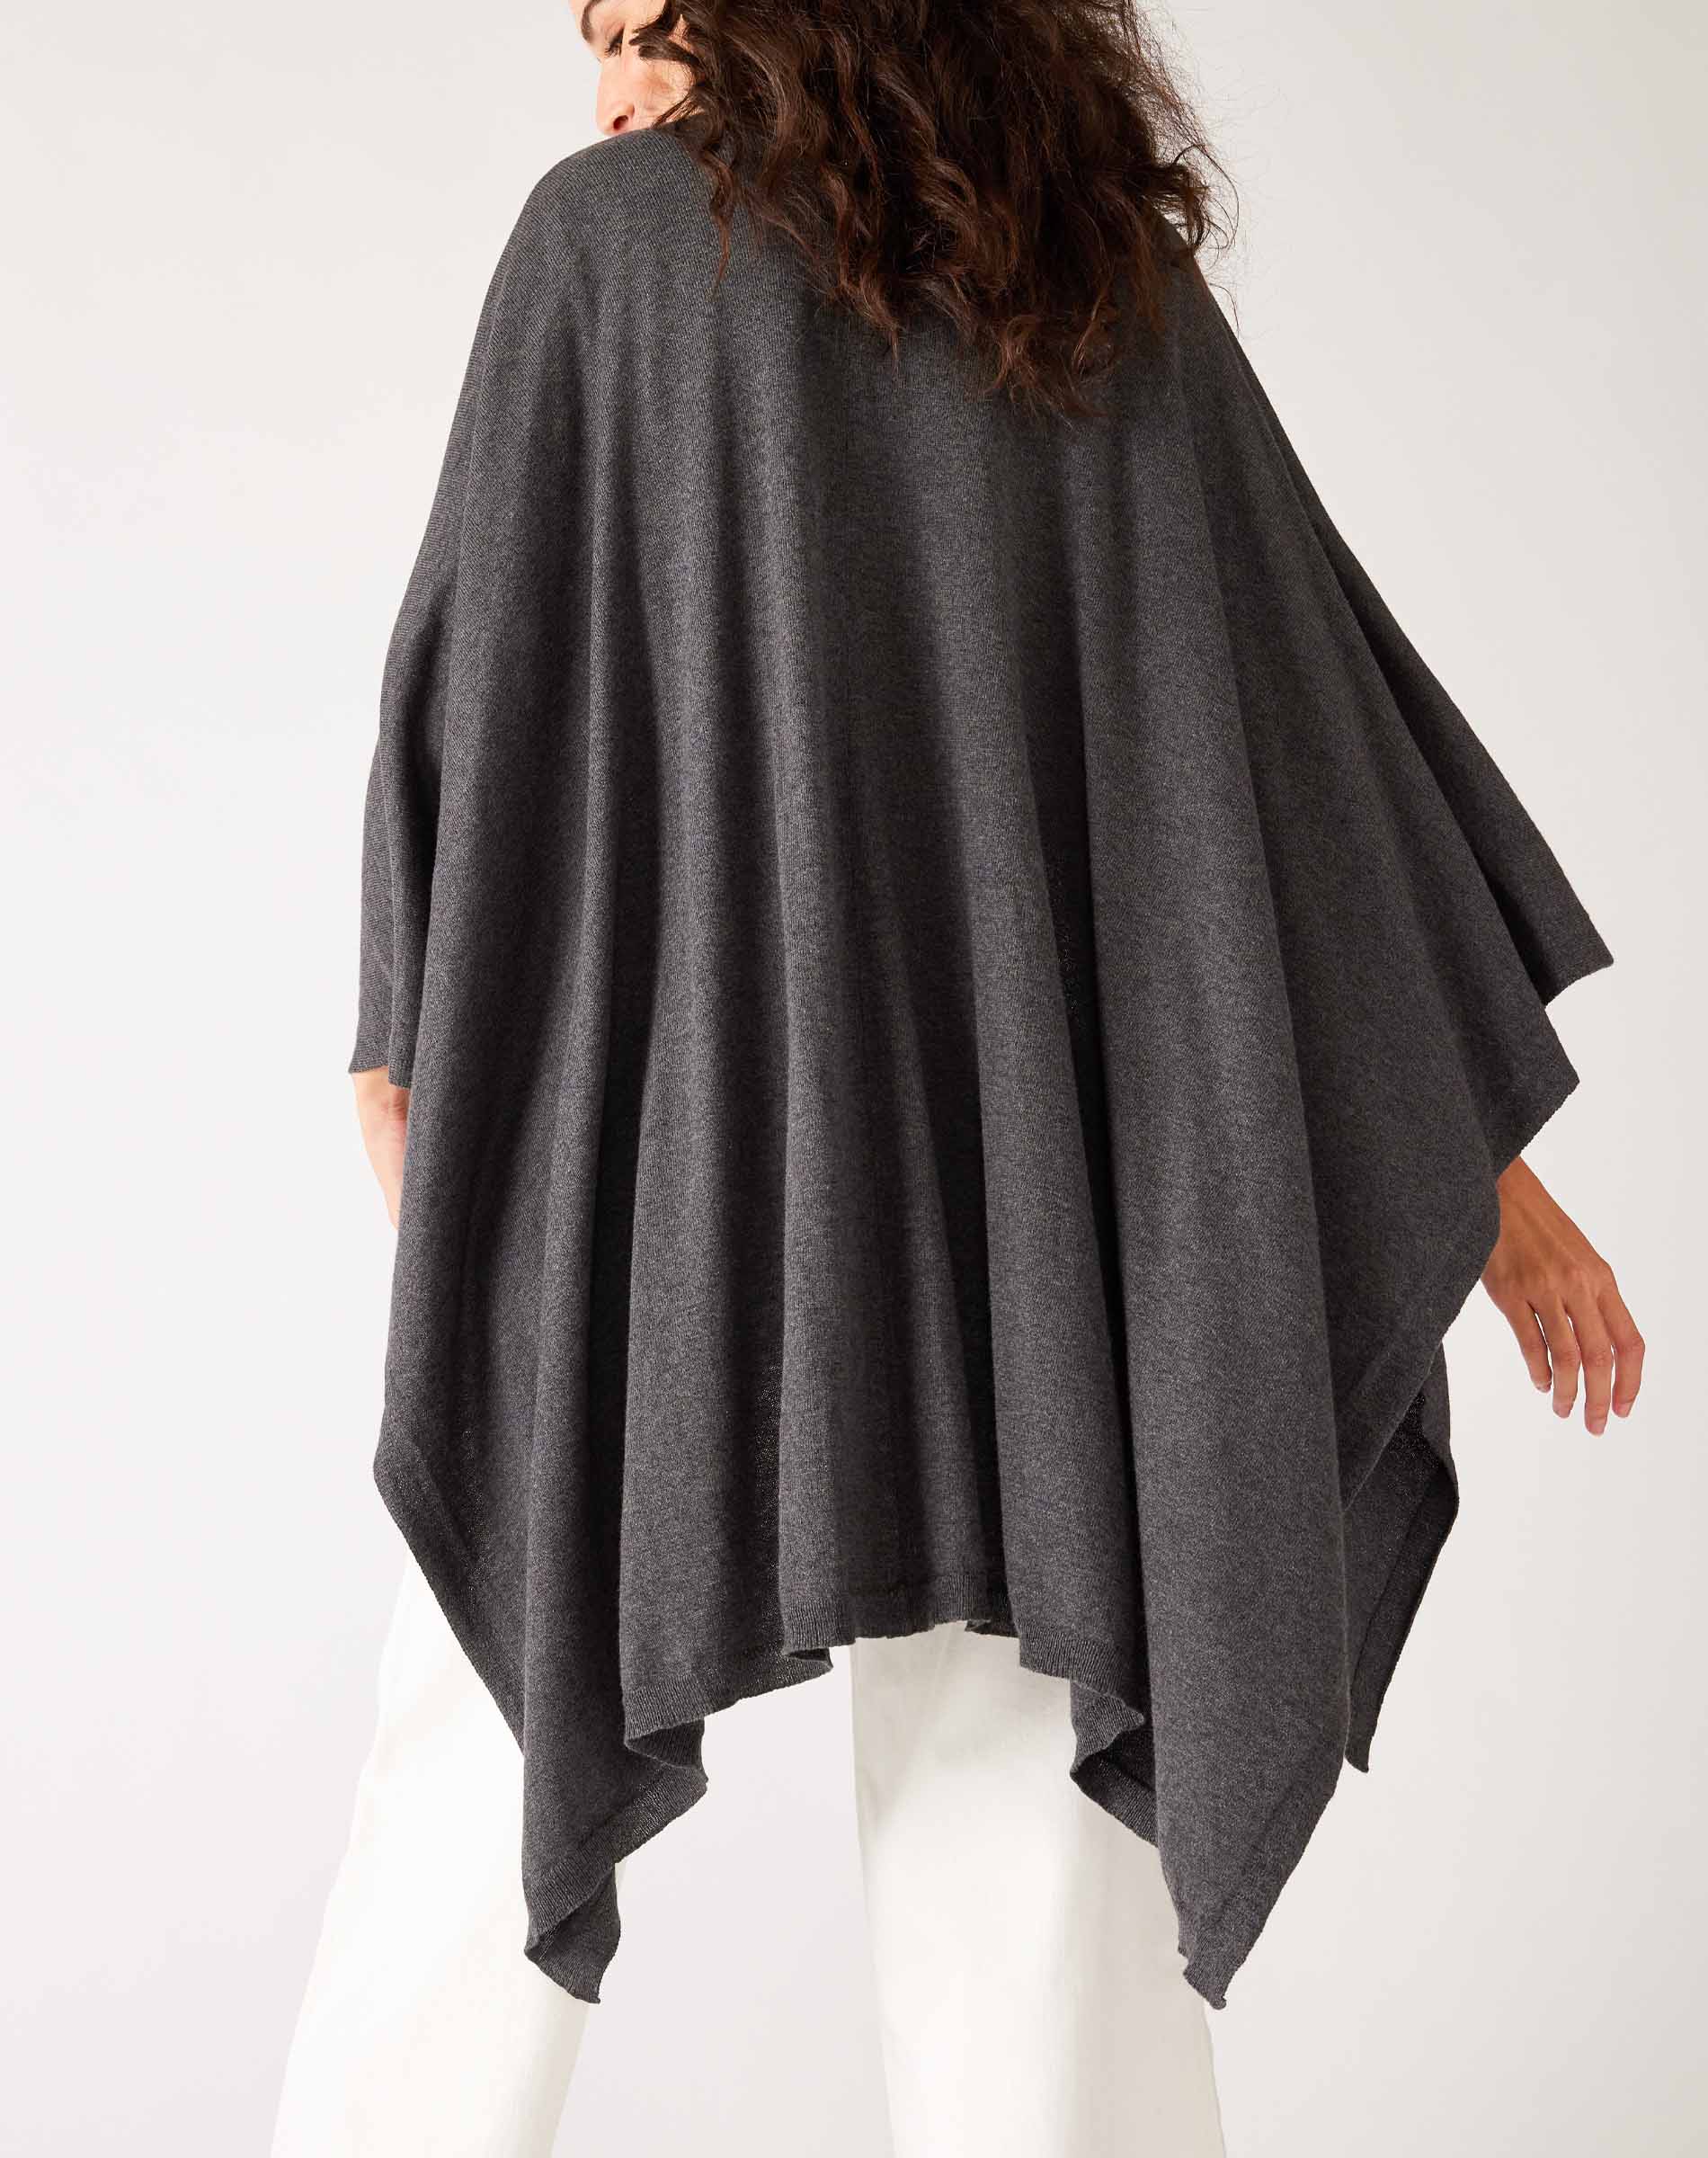 Women's Charcoal Grey Heathered Cashmere Lightweight Travel Wrap Rear View